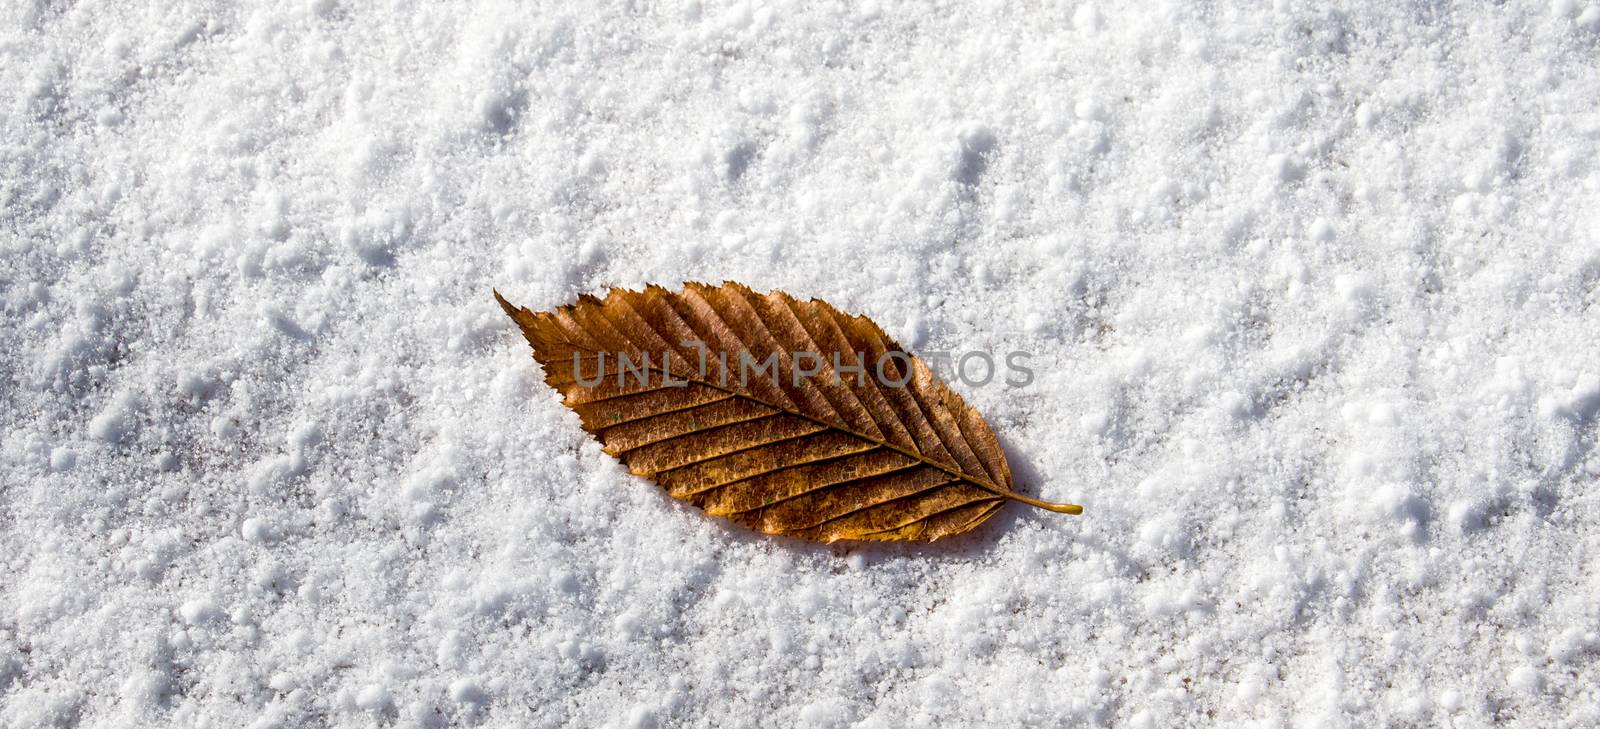 Beautiful dry autumn leaf on a white snowy background